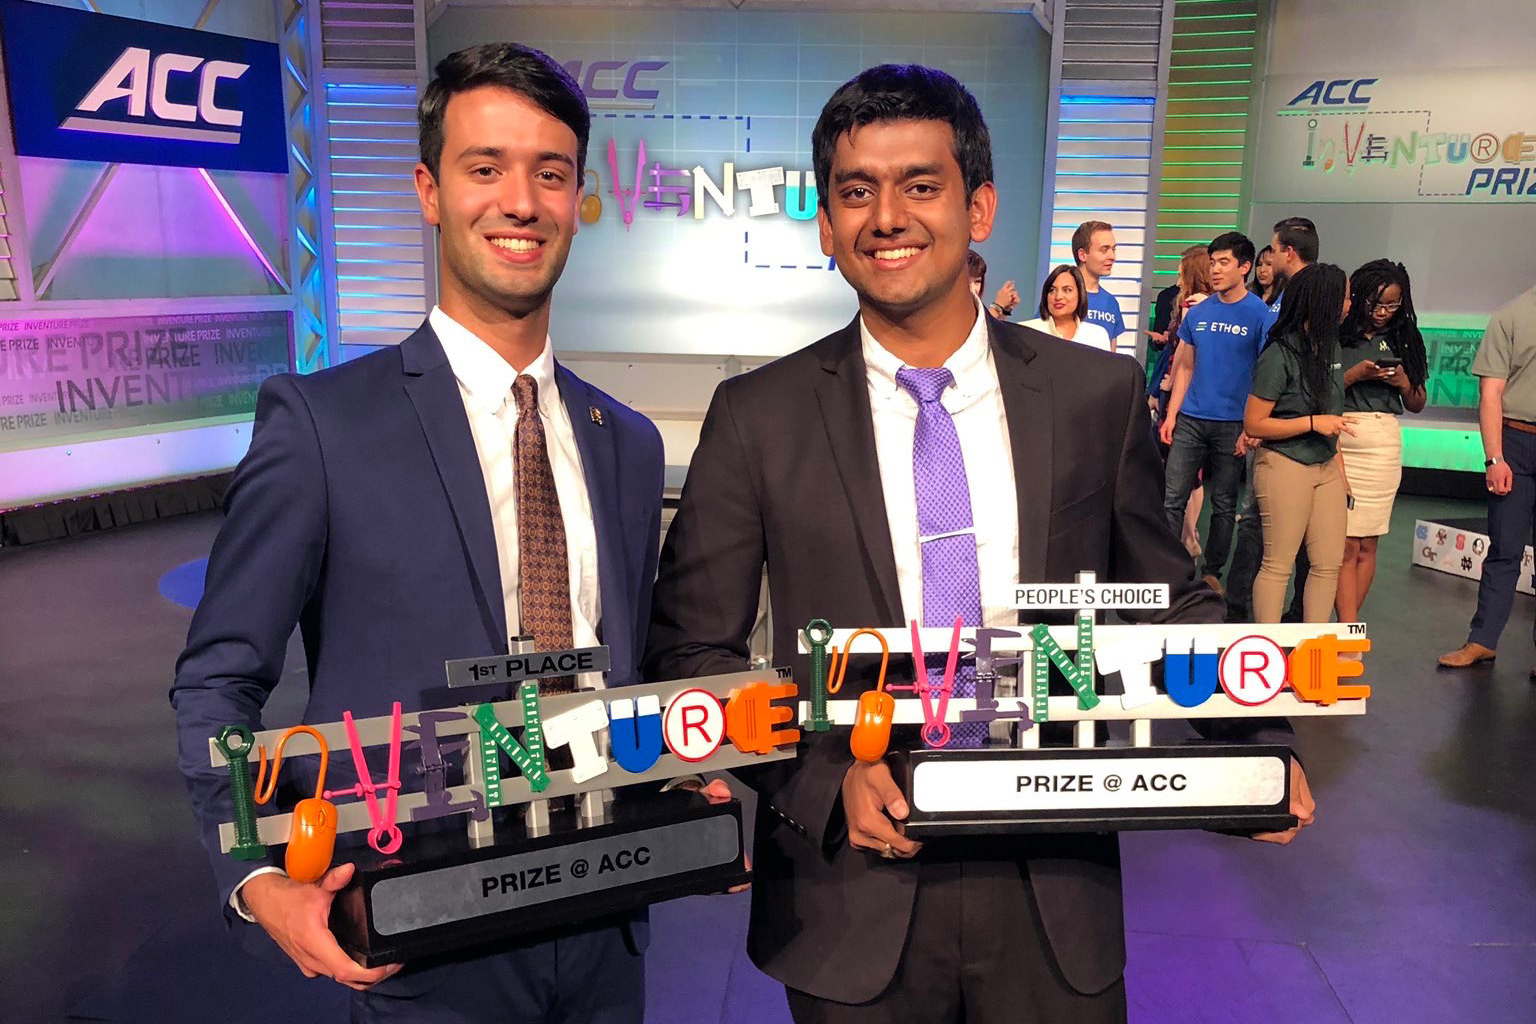 Three years in a row, students from  the UVA Engineering School have won the Atlantic Coast Conference’s top prize for undergraduate entrepreneurs.  including ring students Alexander Singh and Rohit Rustagi in 2019.  UVA Engineering.